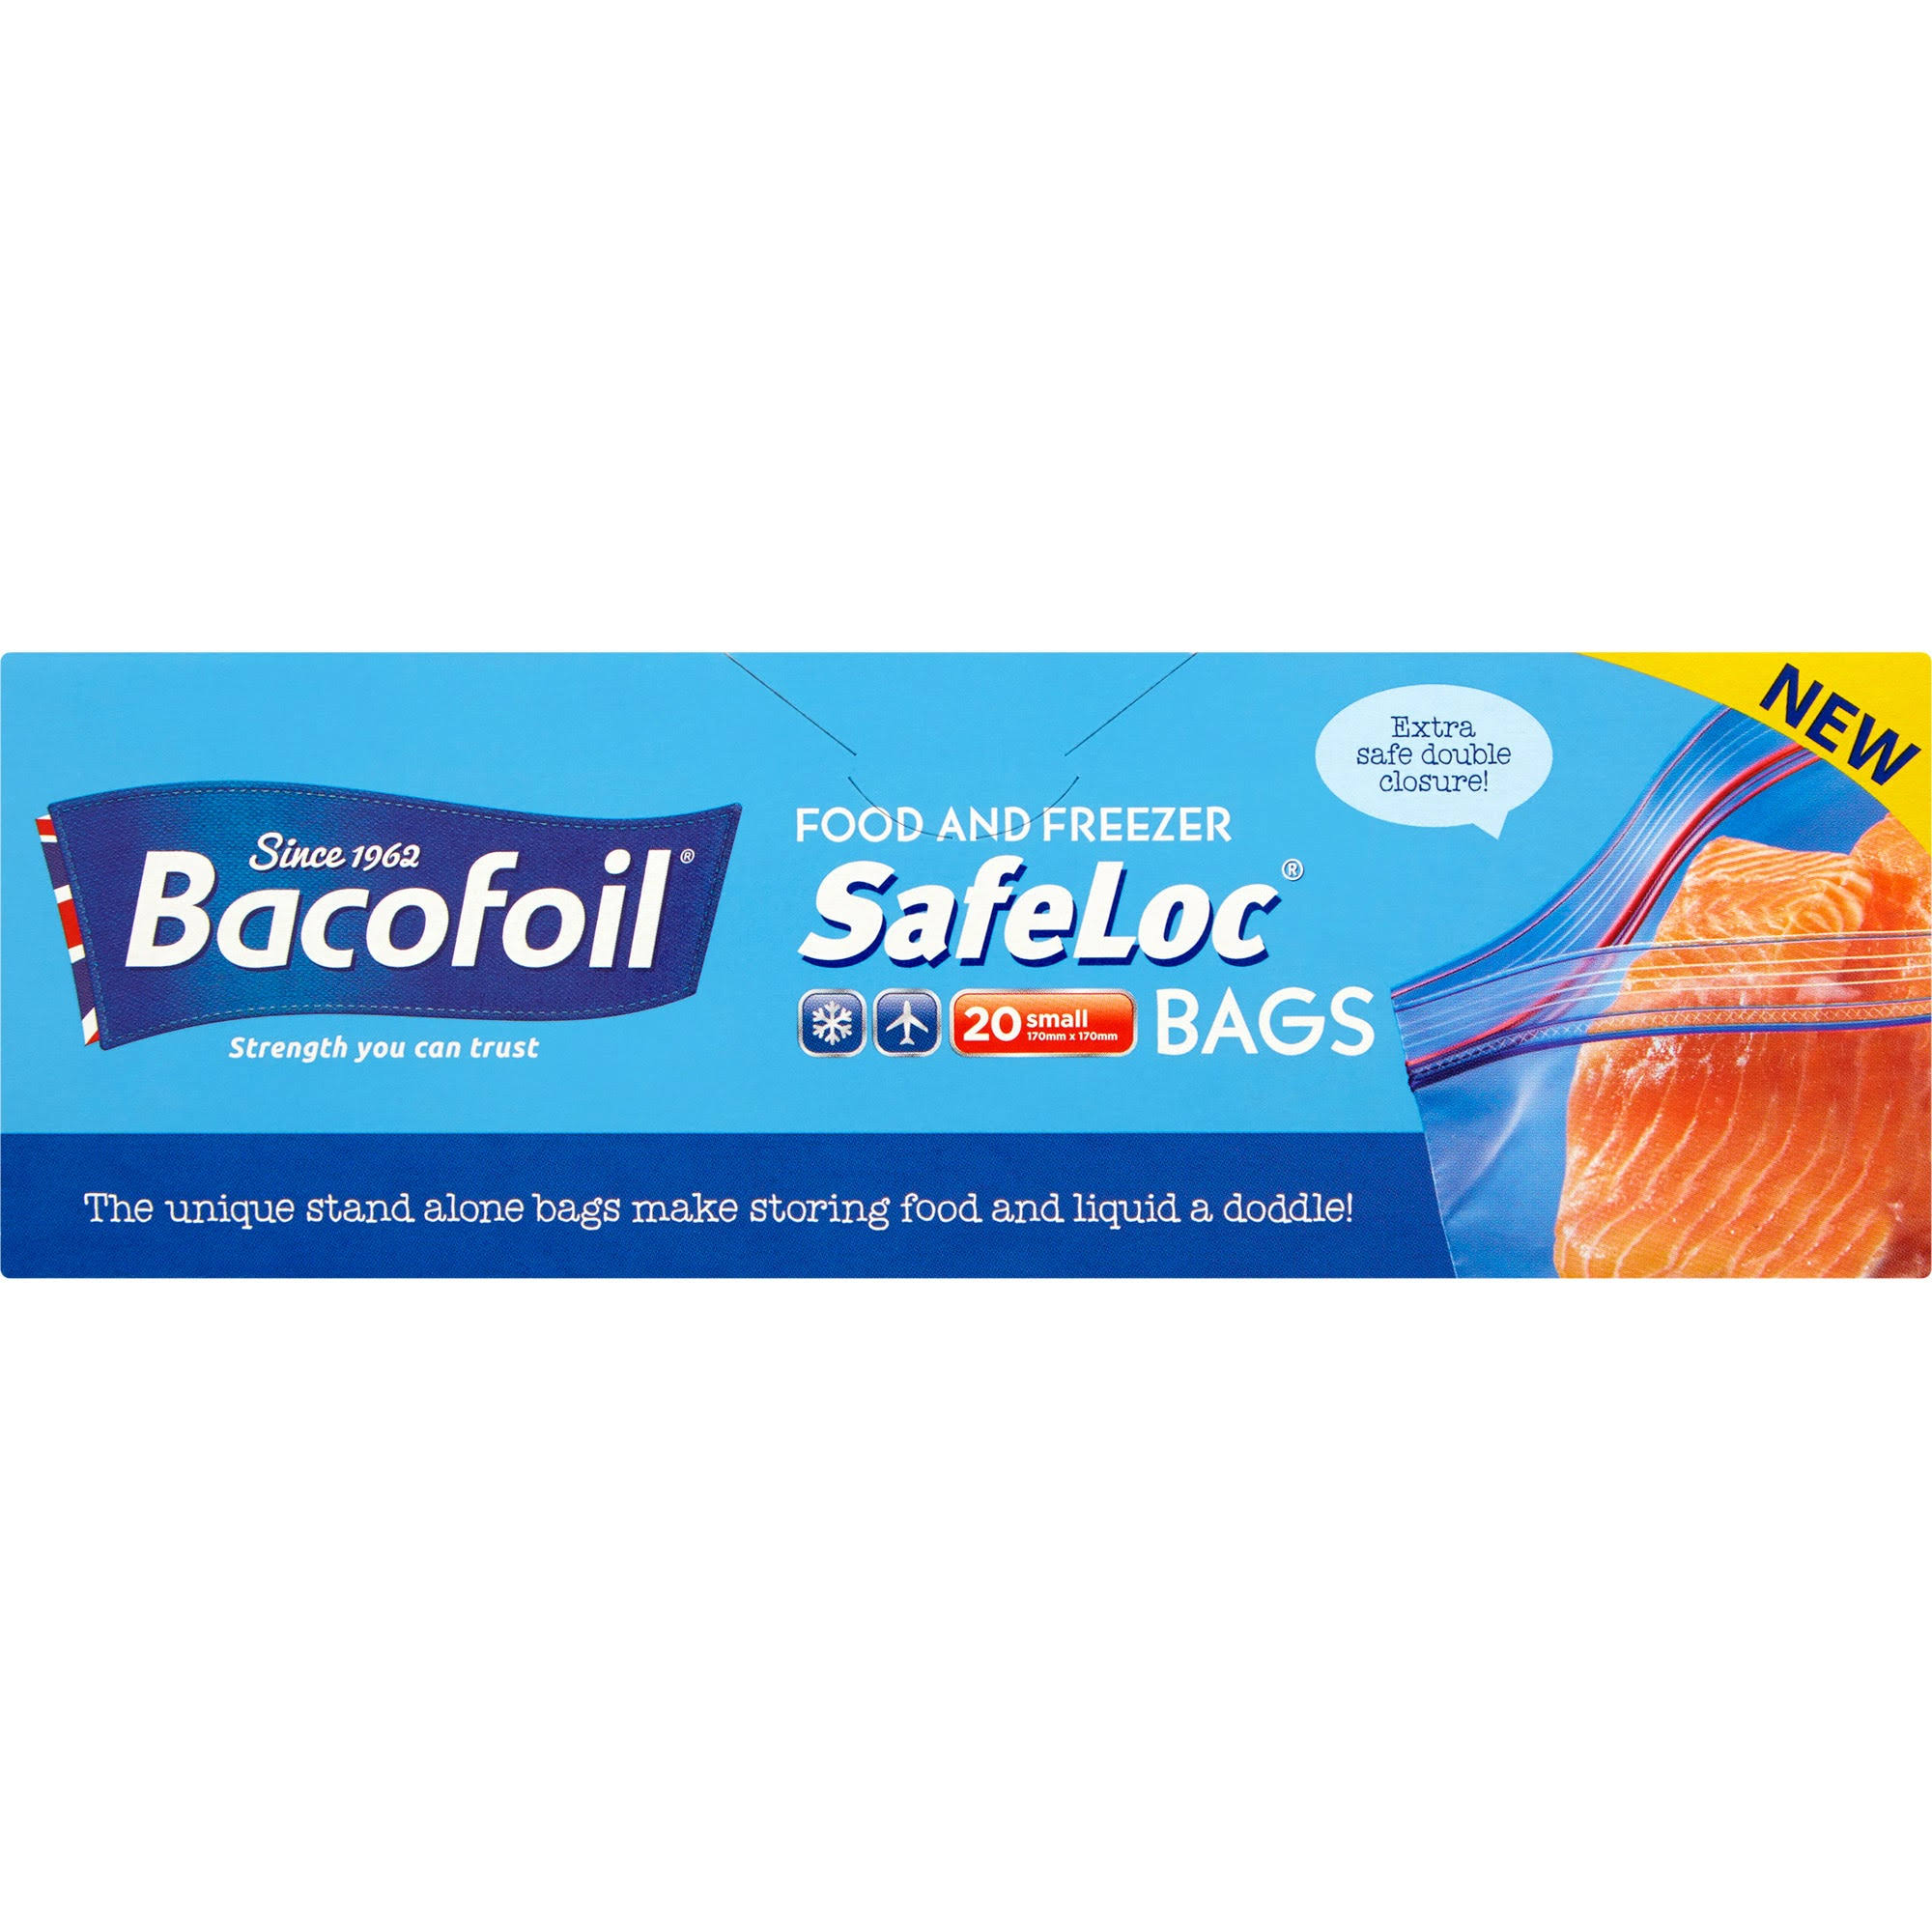 Bacofoil Double-Seal SafeLoc Food and Freezer Bags - 20pk, Small